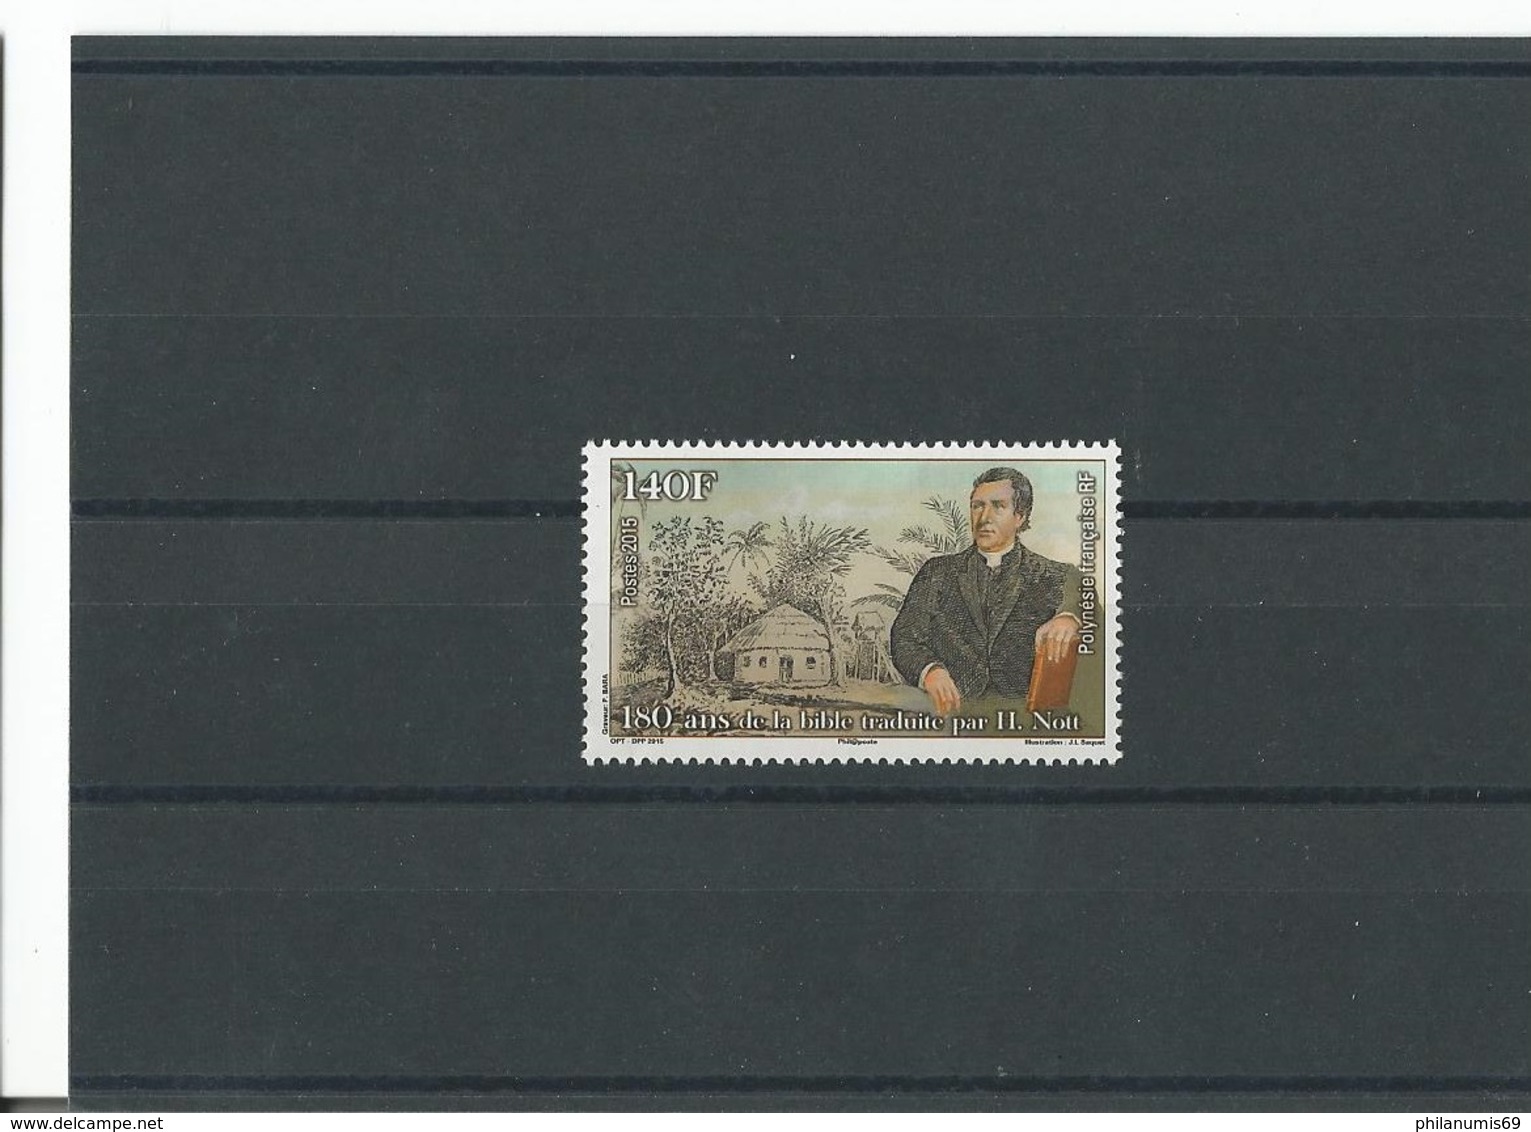 POLYNESIE 2015 - YT 1086 - NEUF SANS CHARNIERE ** (MNH) GOMME D'ORIGINE LUXE - Unused Stamps